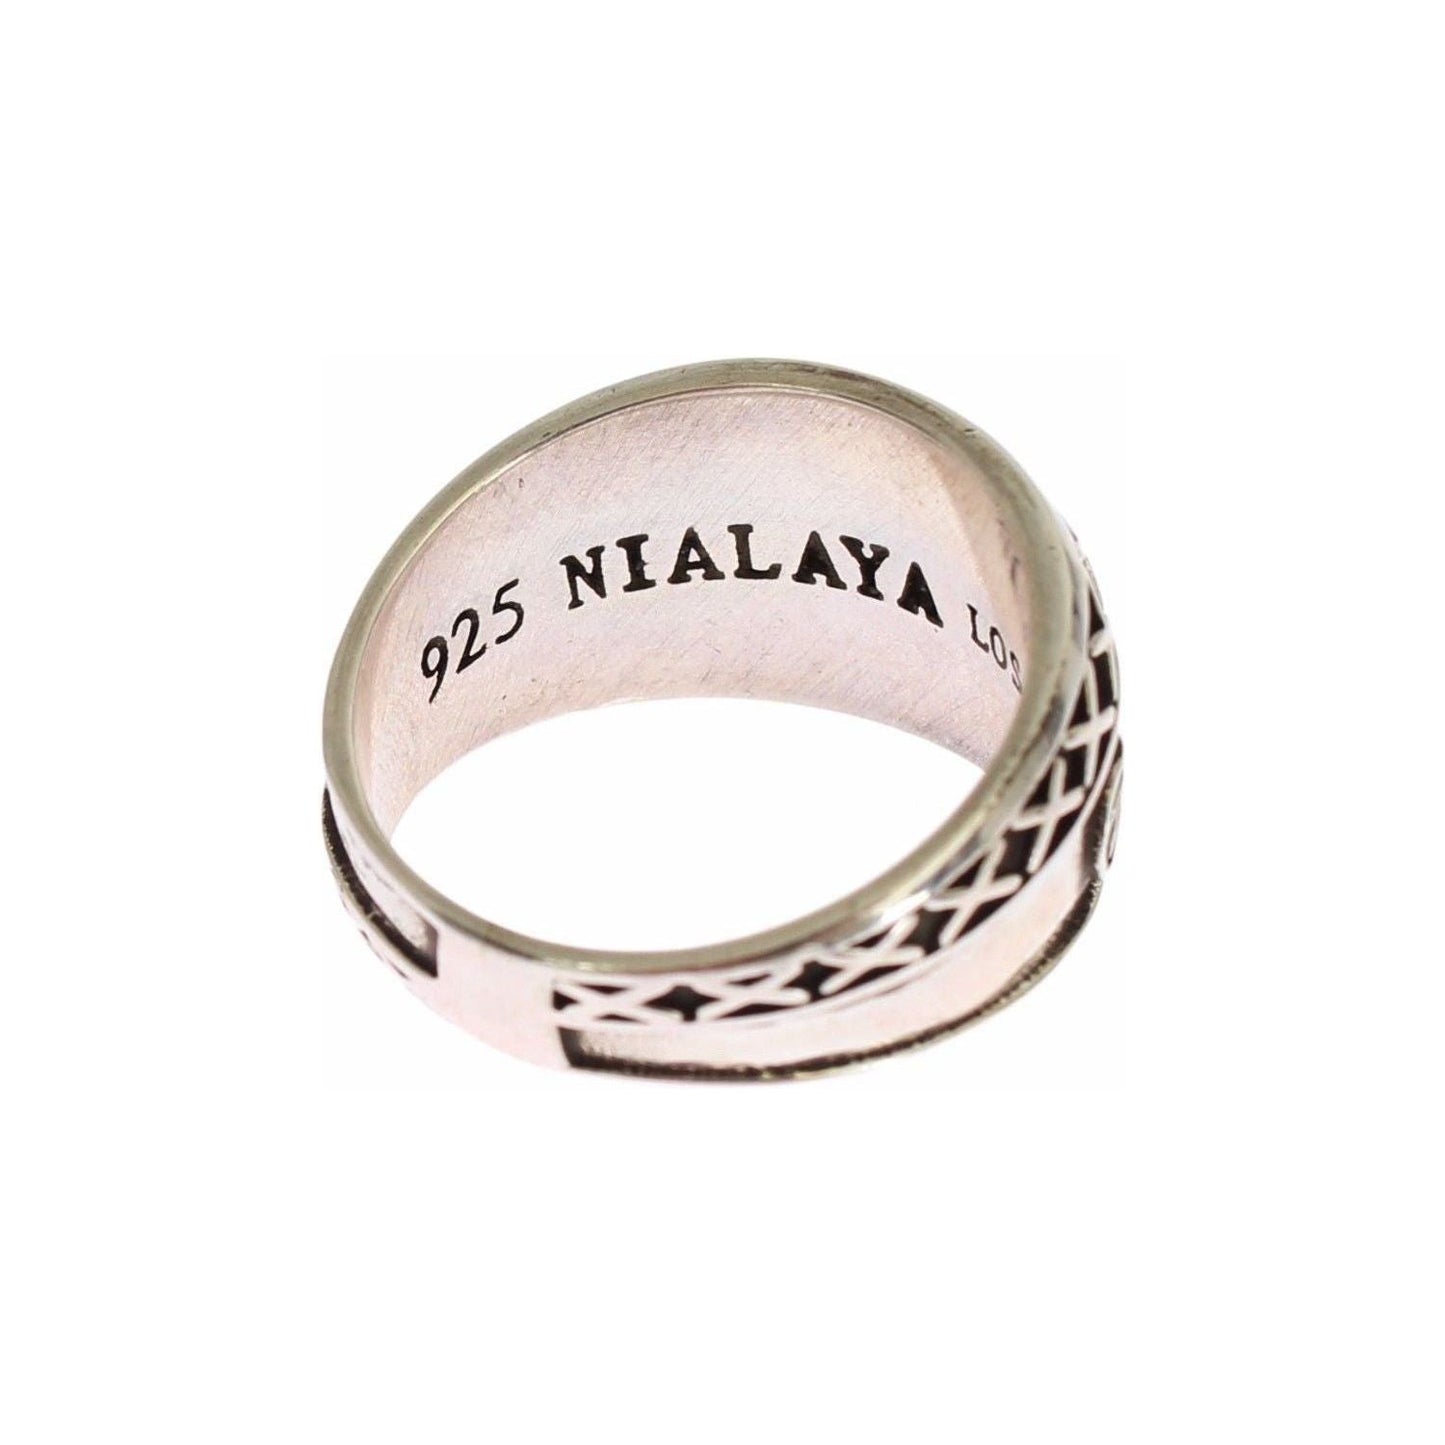 Nialaya Elegant Silver Band with Black Accents silver-rhodium-925-sterling-ring Ring s-l1600-23-1-e48bd937-778.jpg